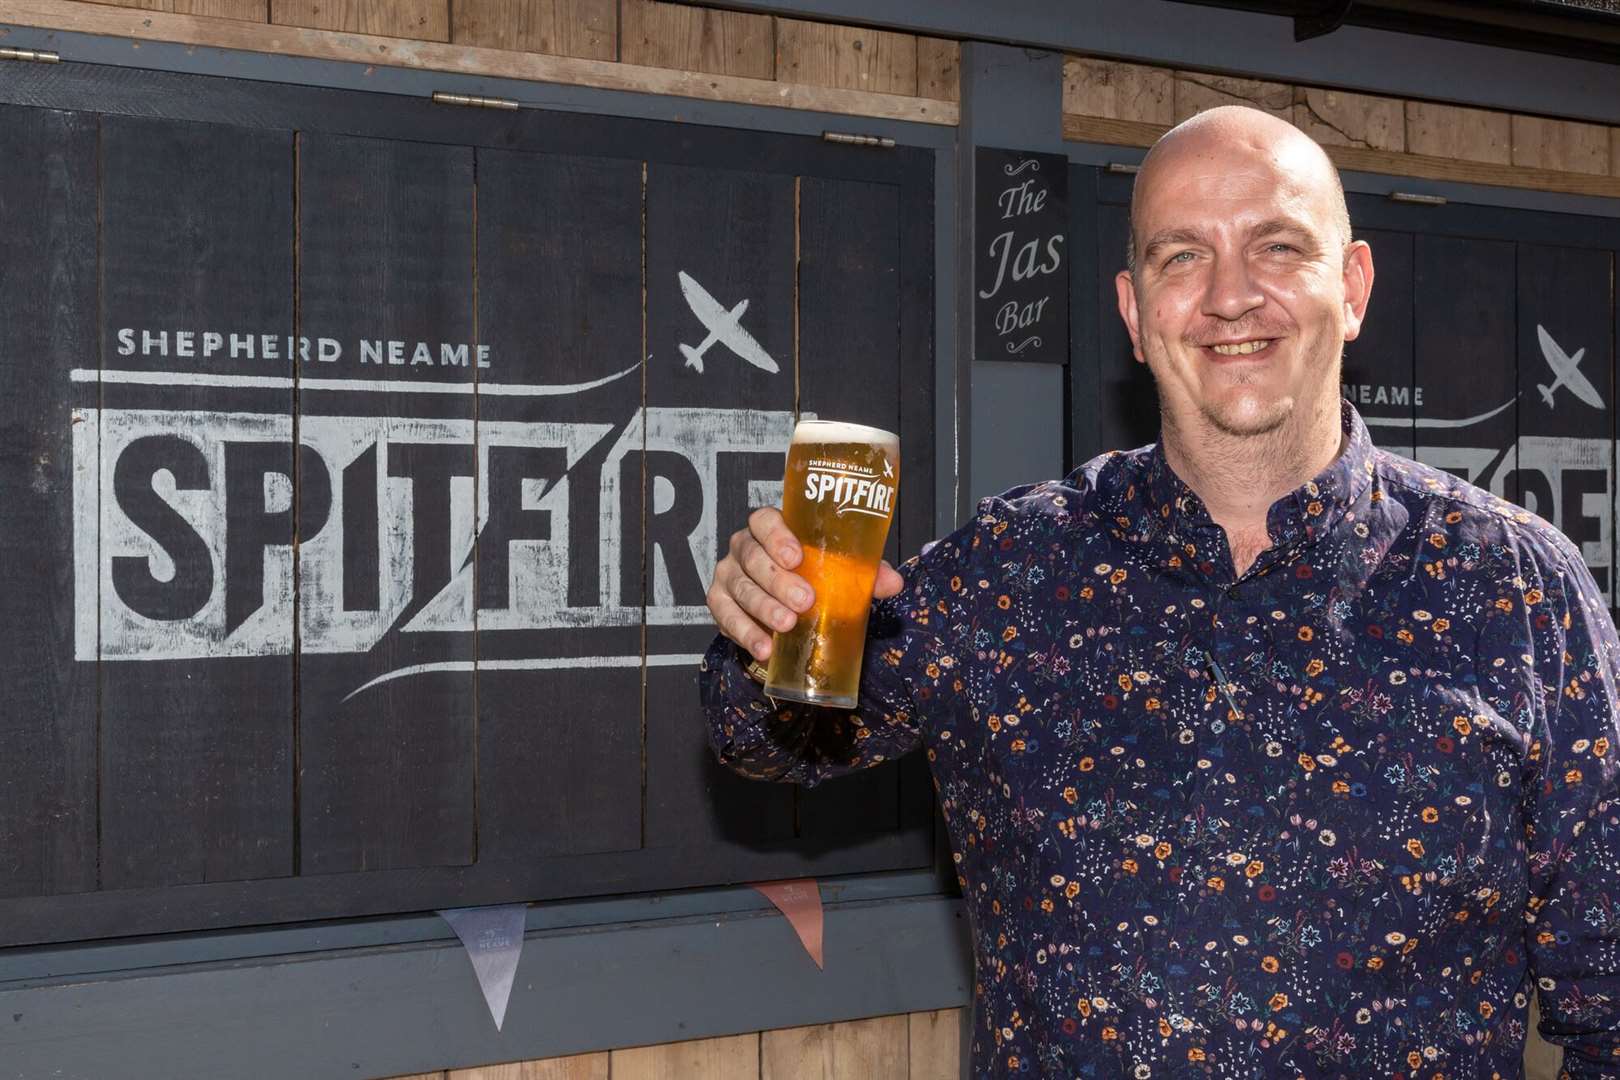 Chris Peach is the general manager of Shepherd Neame’s popular Spitfire pub in Kings Hill